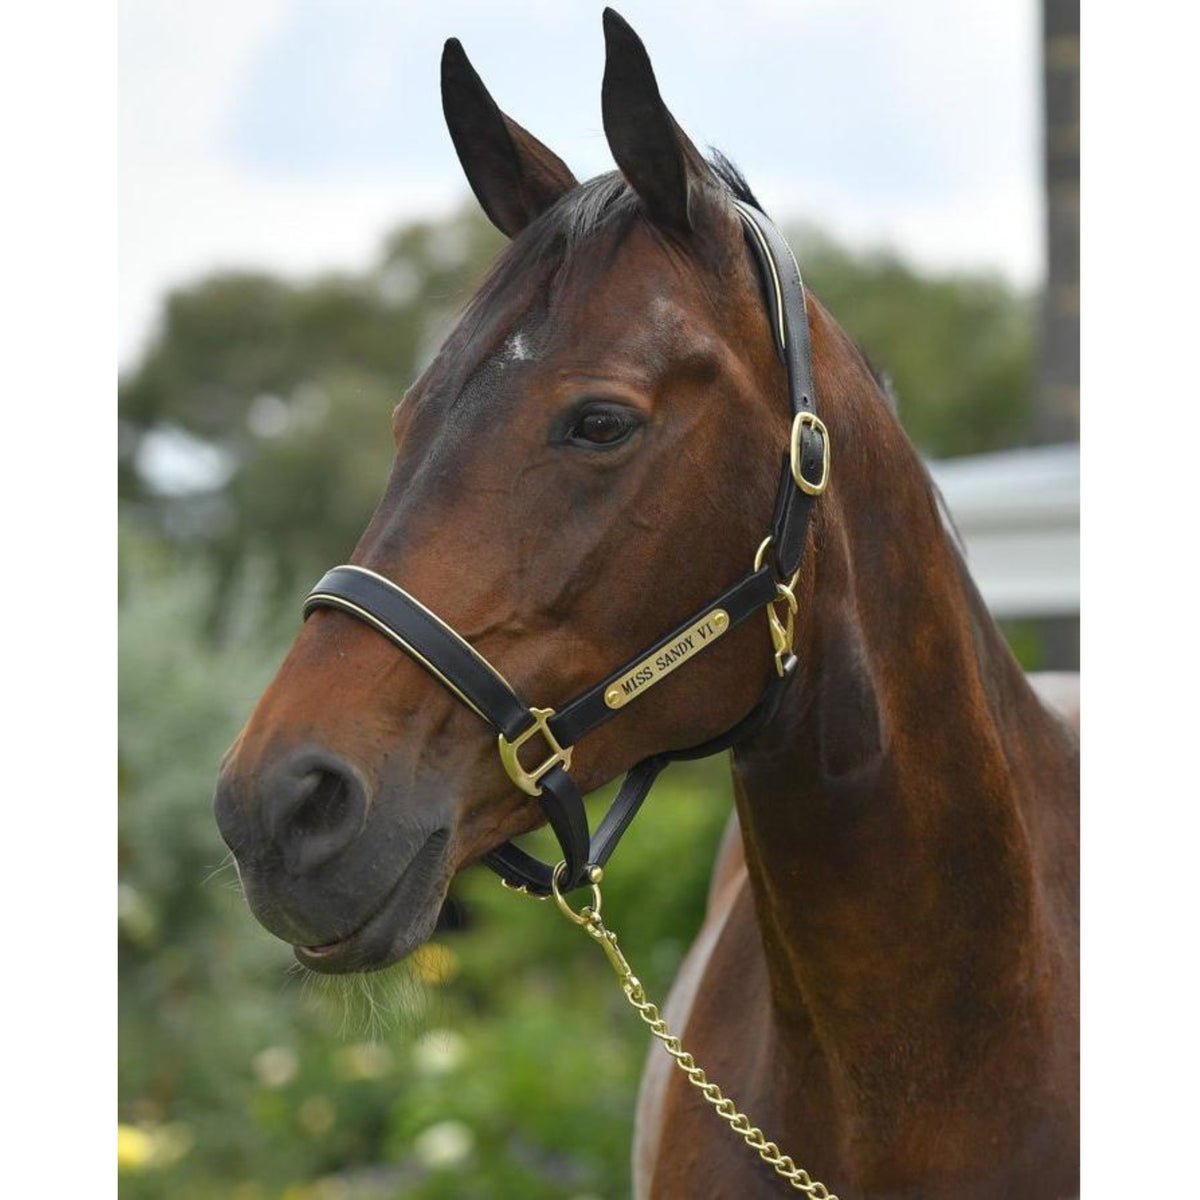 Bay horse wearing black leather halter with brass fixings and nameplate.